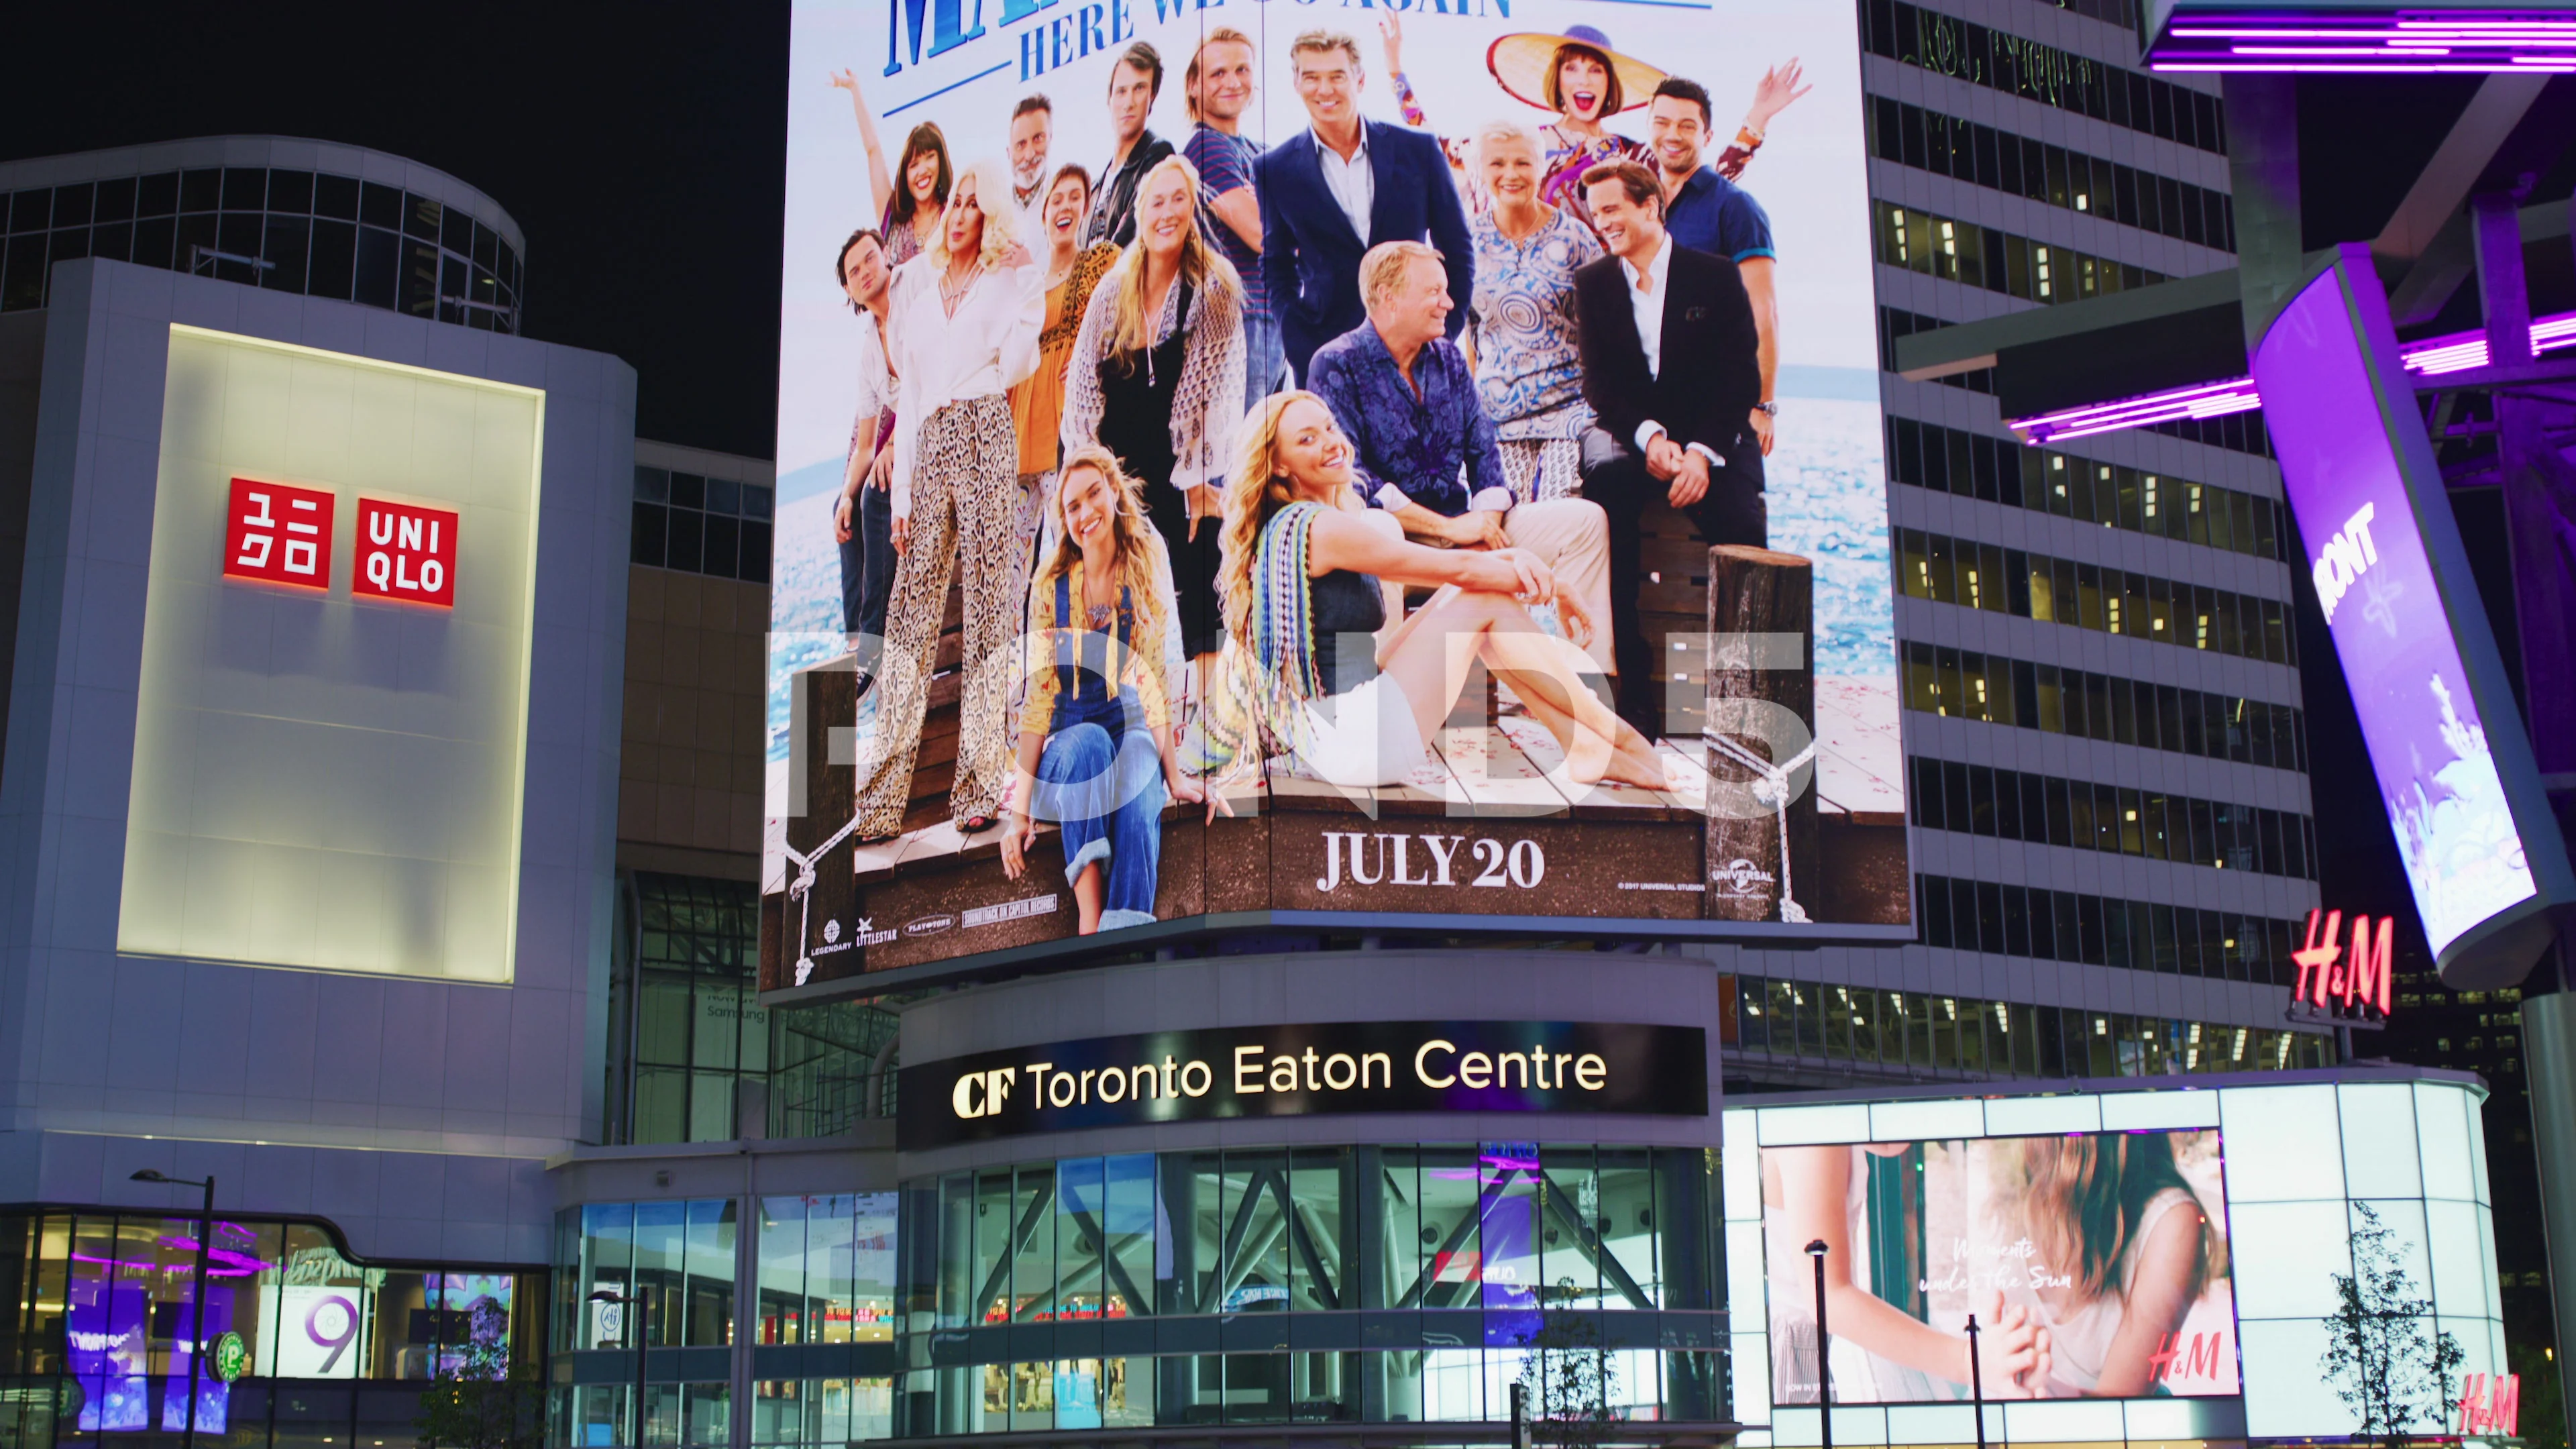 The Complete Guide to Toronto Eaton Centre